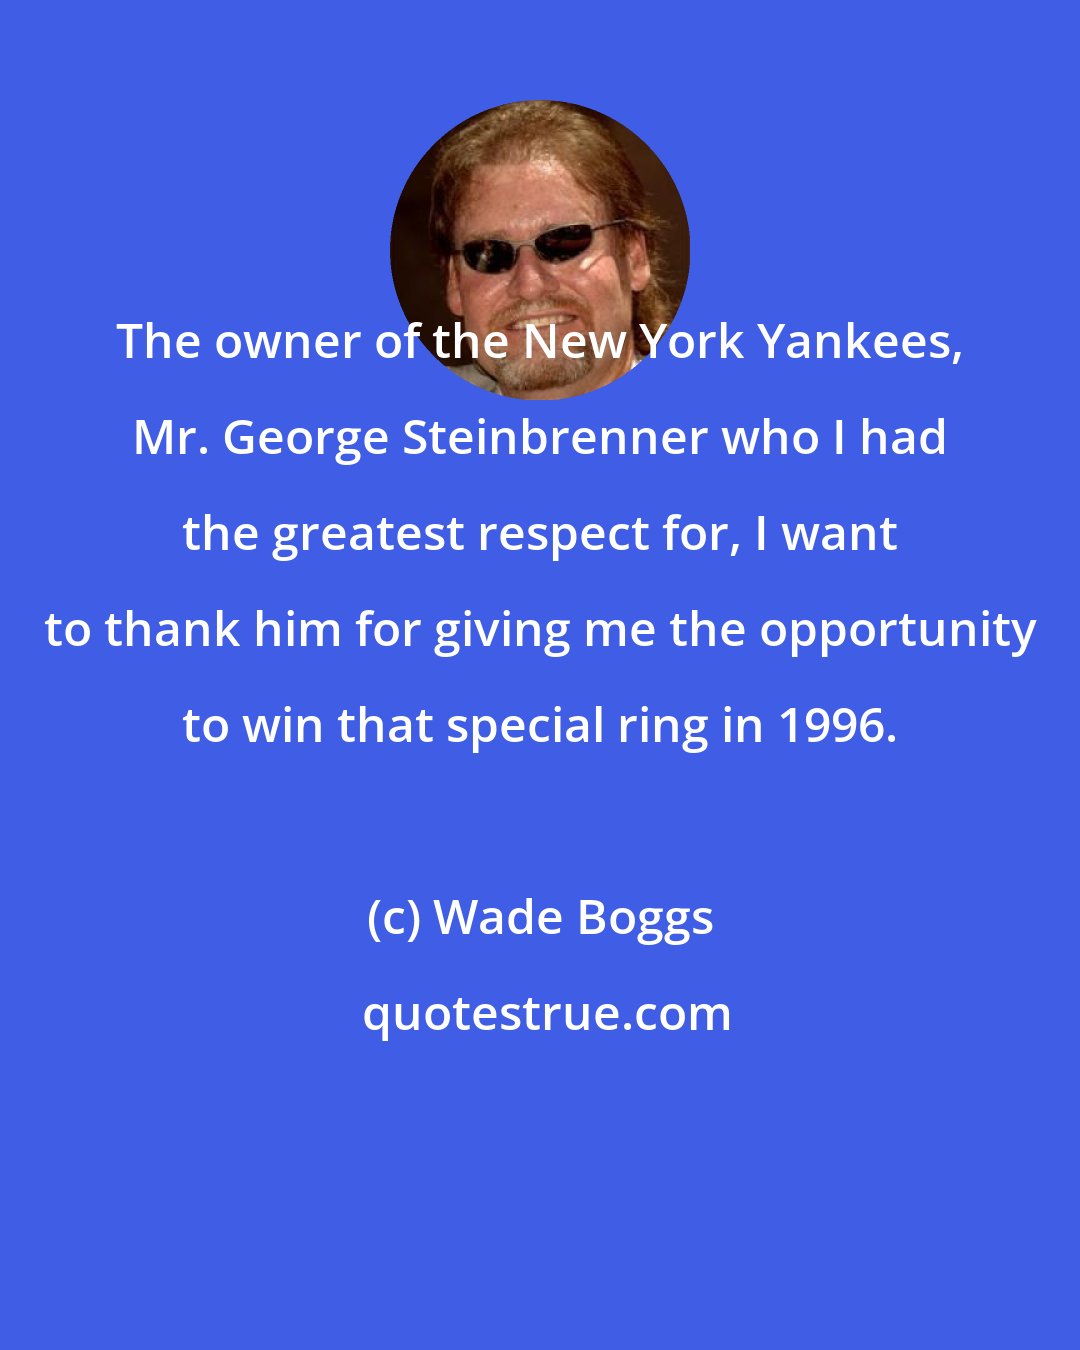 Wade Boggs: The owner of the New York Yankees, Mr. George Steinbrenner who I had the greatest respect for, I want to thank him for giving me the opportunity to win that special ring in 1996.